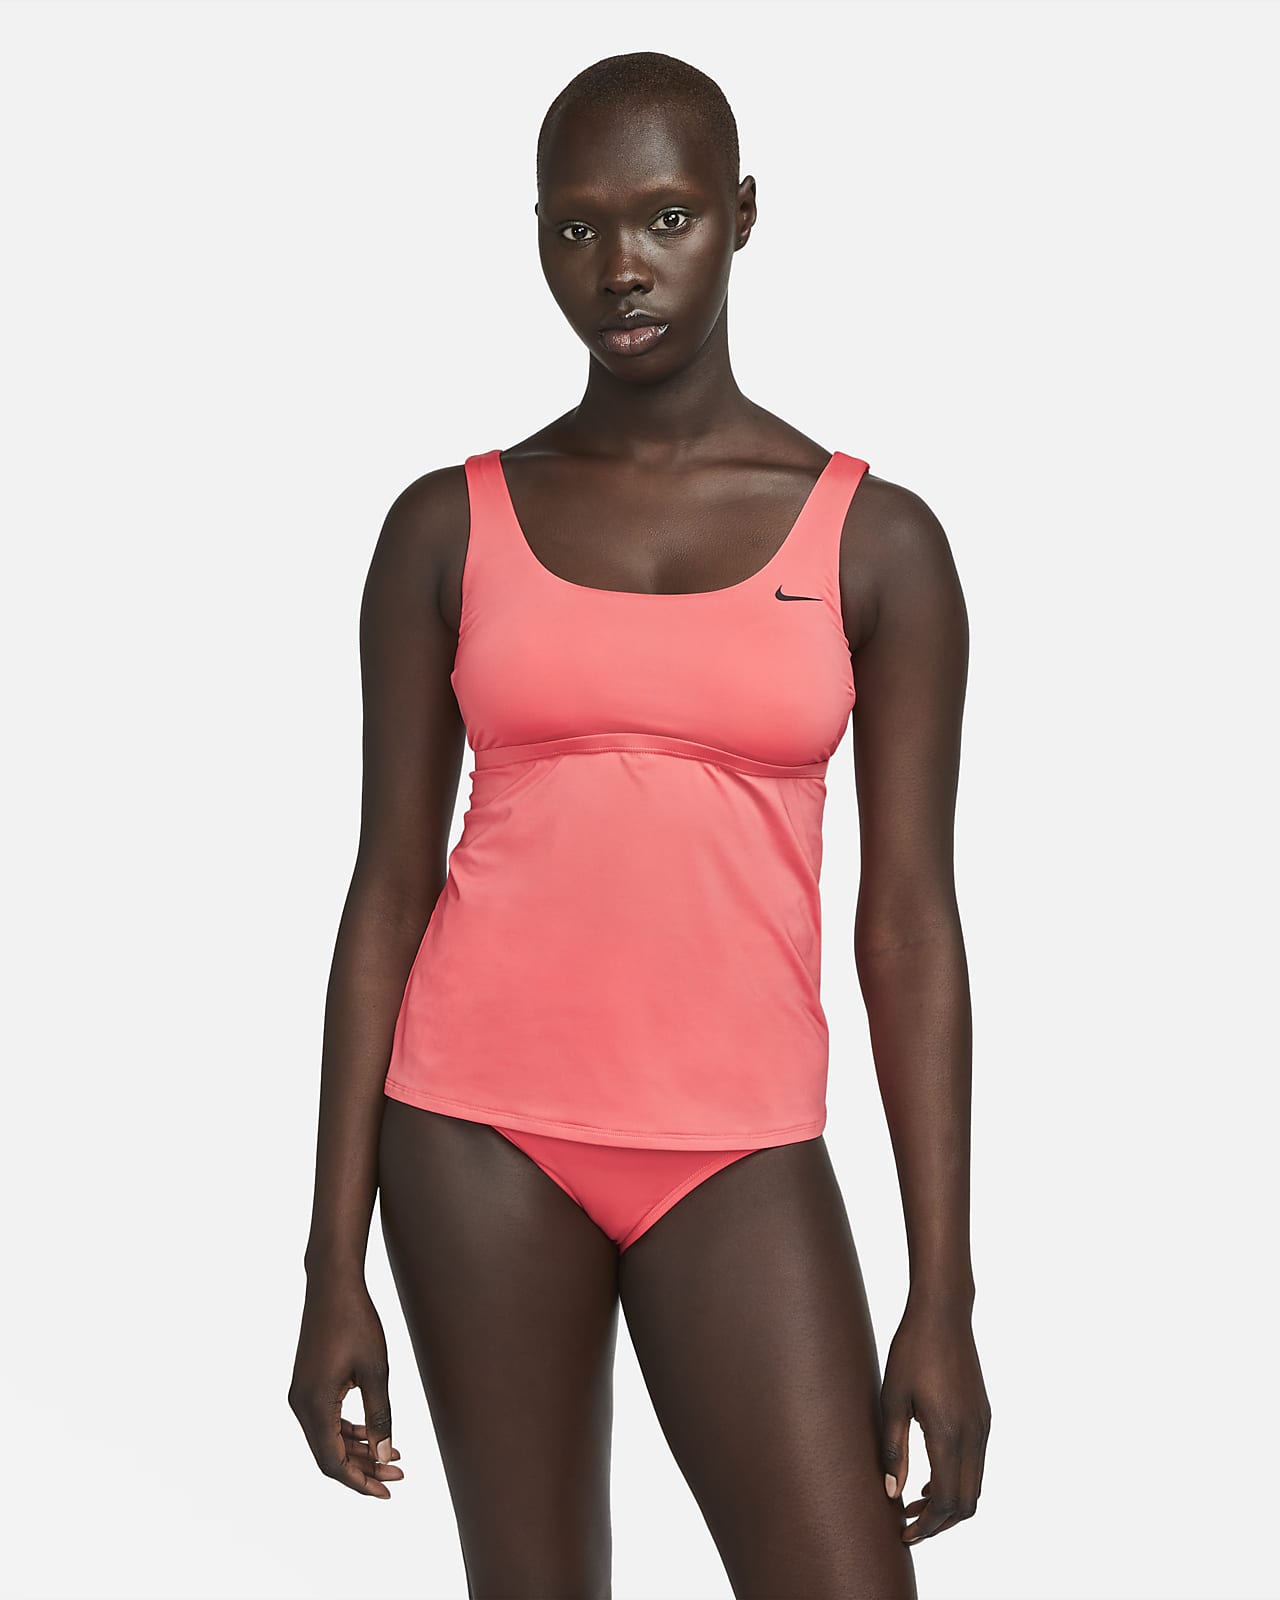 https://static.nike.com/a/images/t_PDP_1280_v1/f_auto,q_auto:eco/c6b6a15a-f0bf-4fce-9712-5c5e77ea0bb9/tankini-womens-swimsuit-top-pjV6s0.png